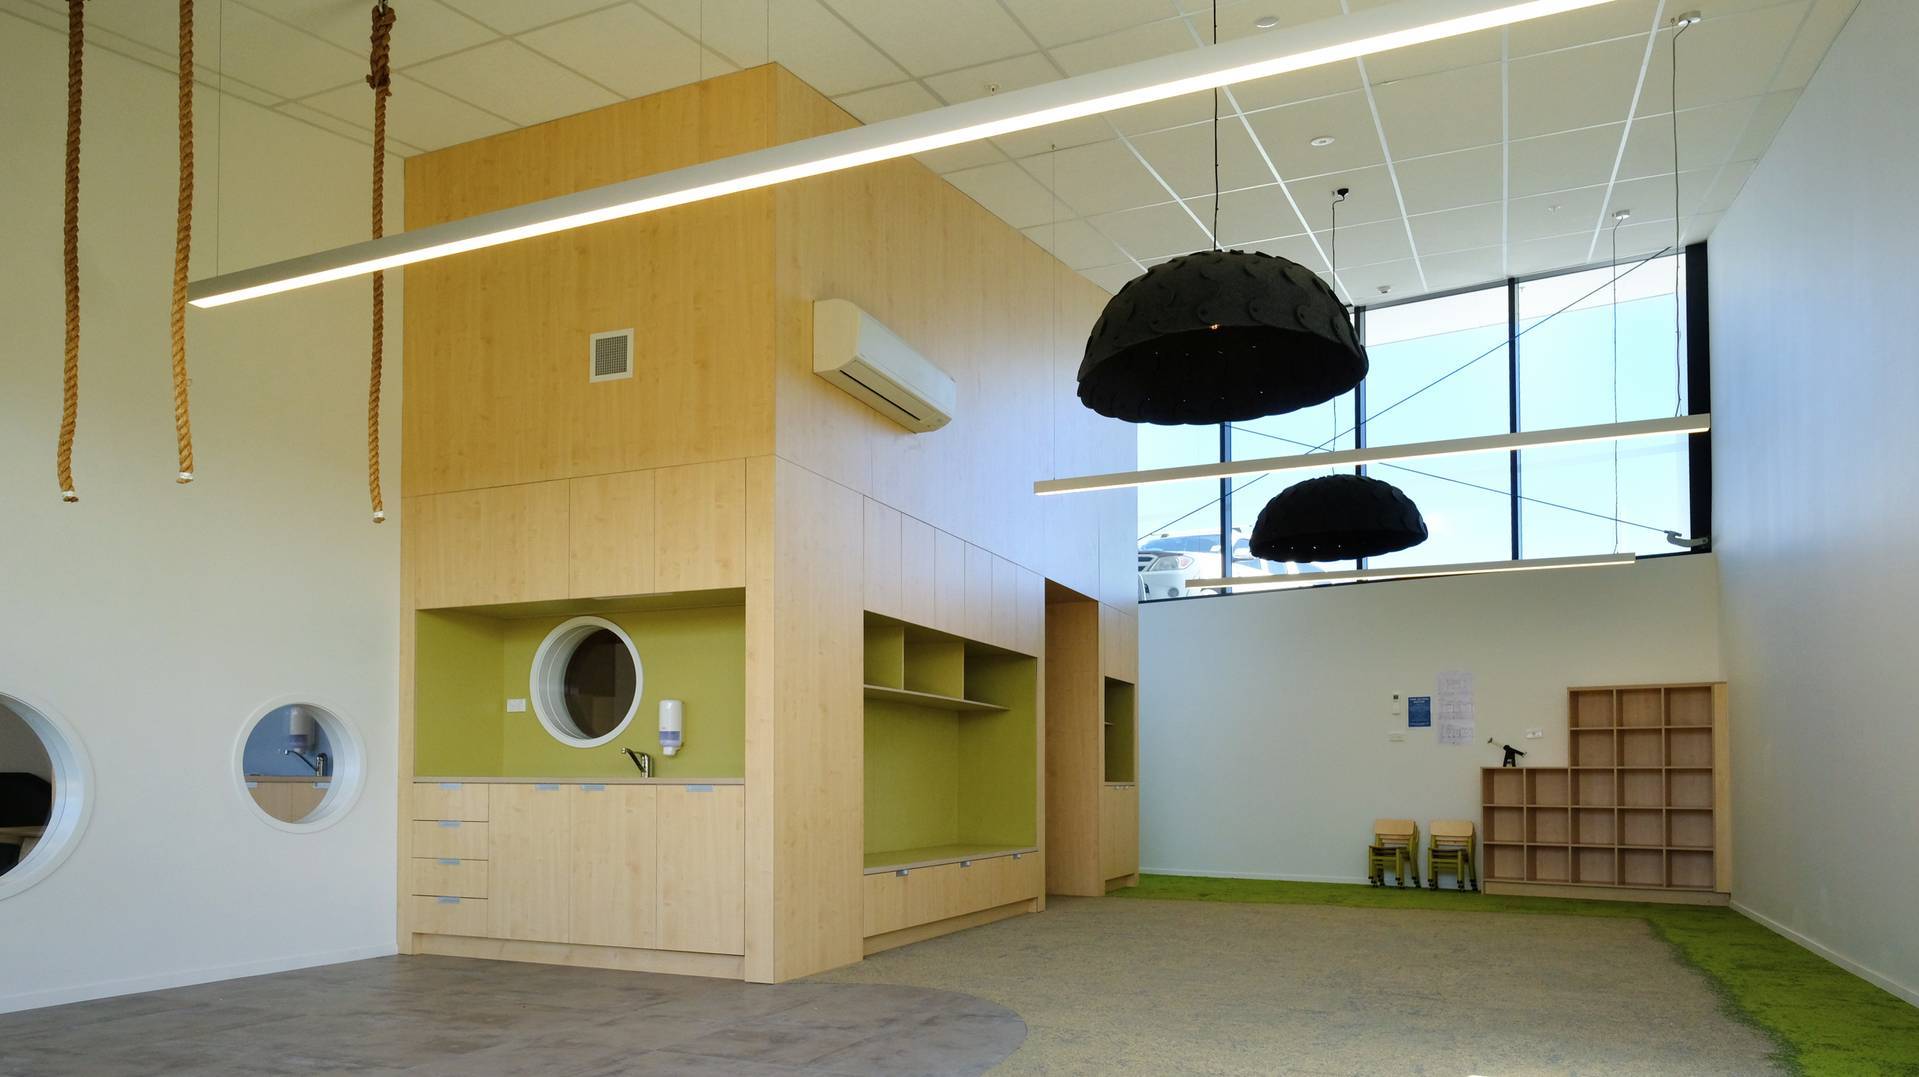 Silverdale Child Care by Herbst Maxcey Metropolitan Architects